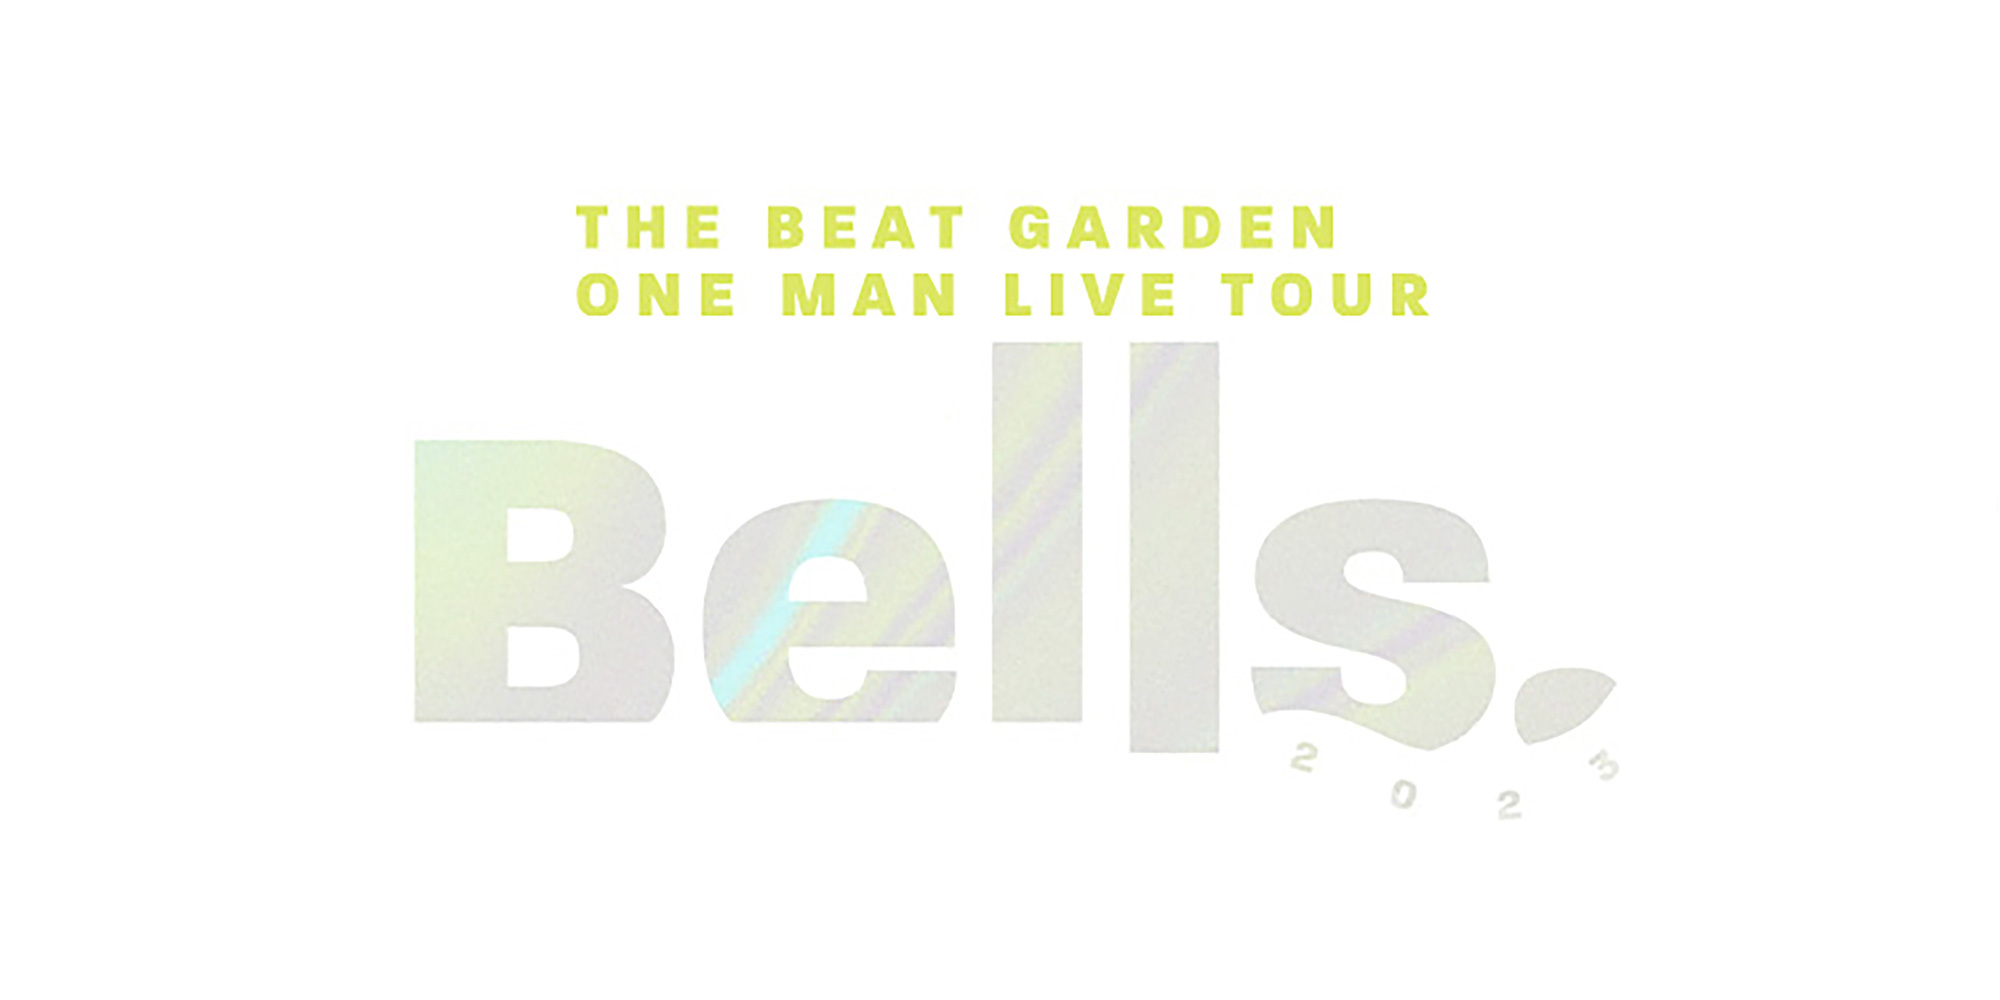 THE BEAT GARDEN (ビートガーデン) OFFICIAL SITE